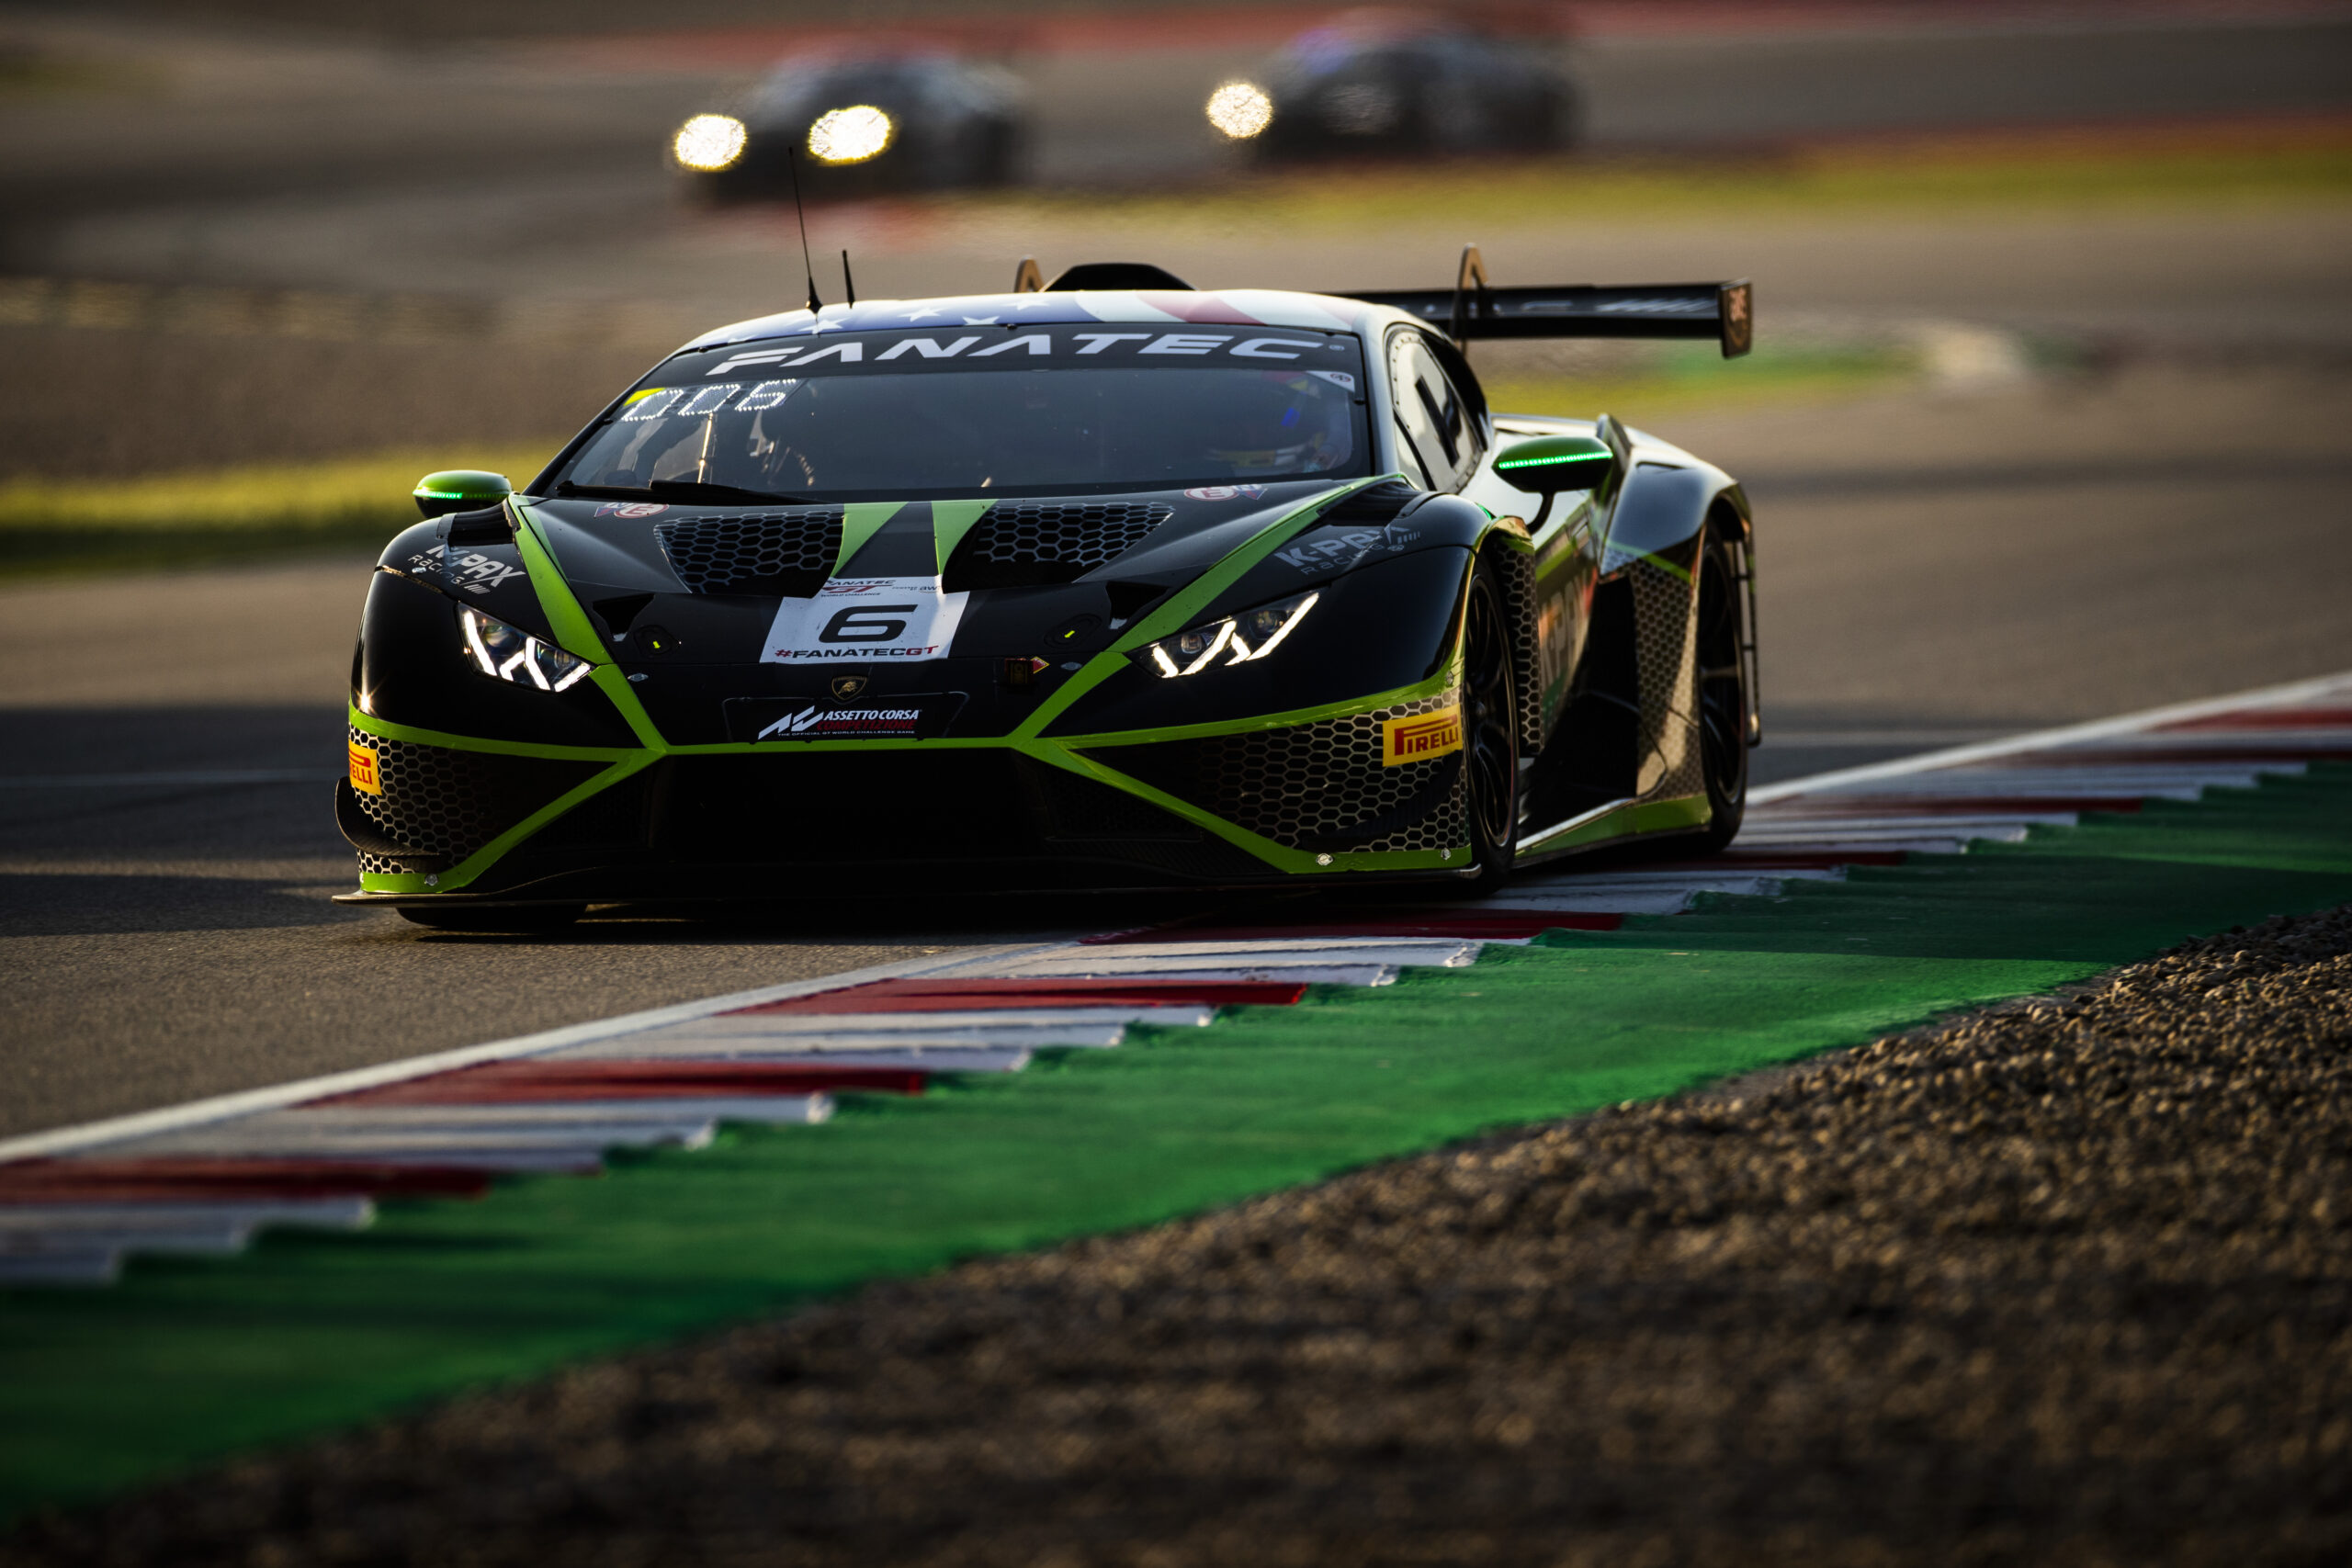 Suspension issues thwart K-PAX Racing’s charge at Barcelona finale